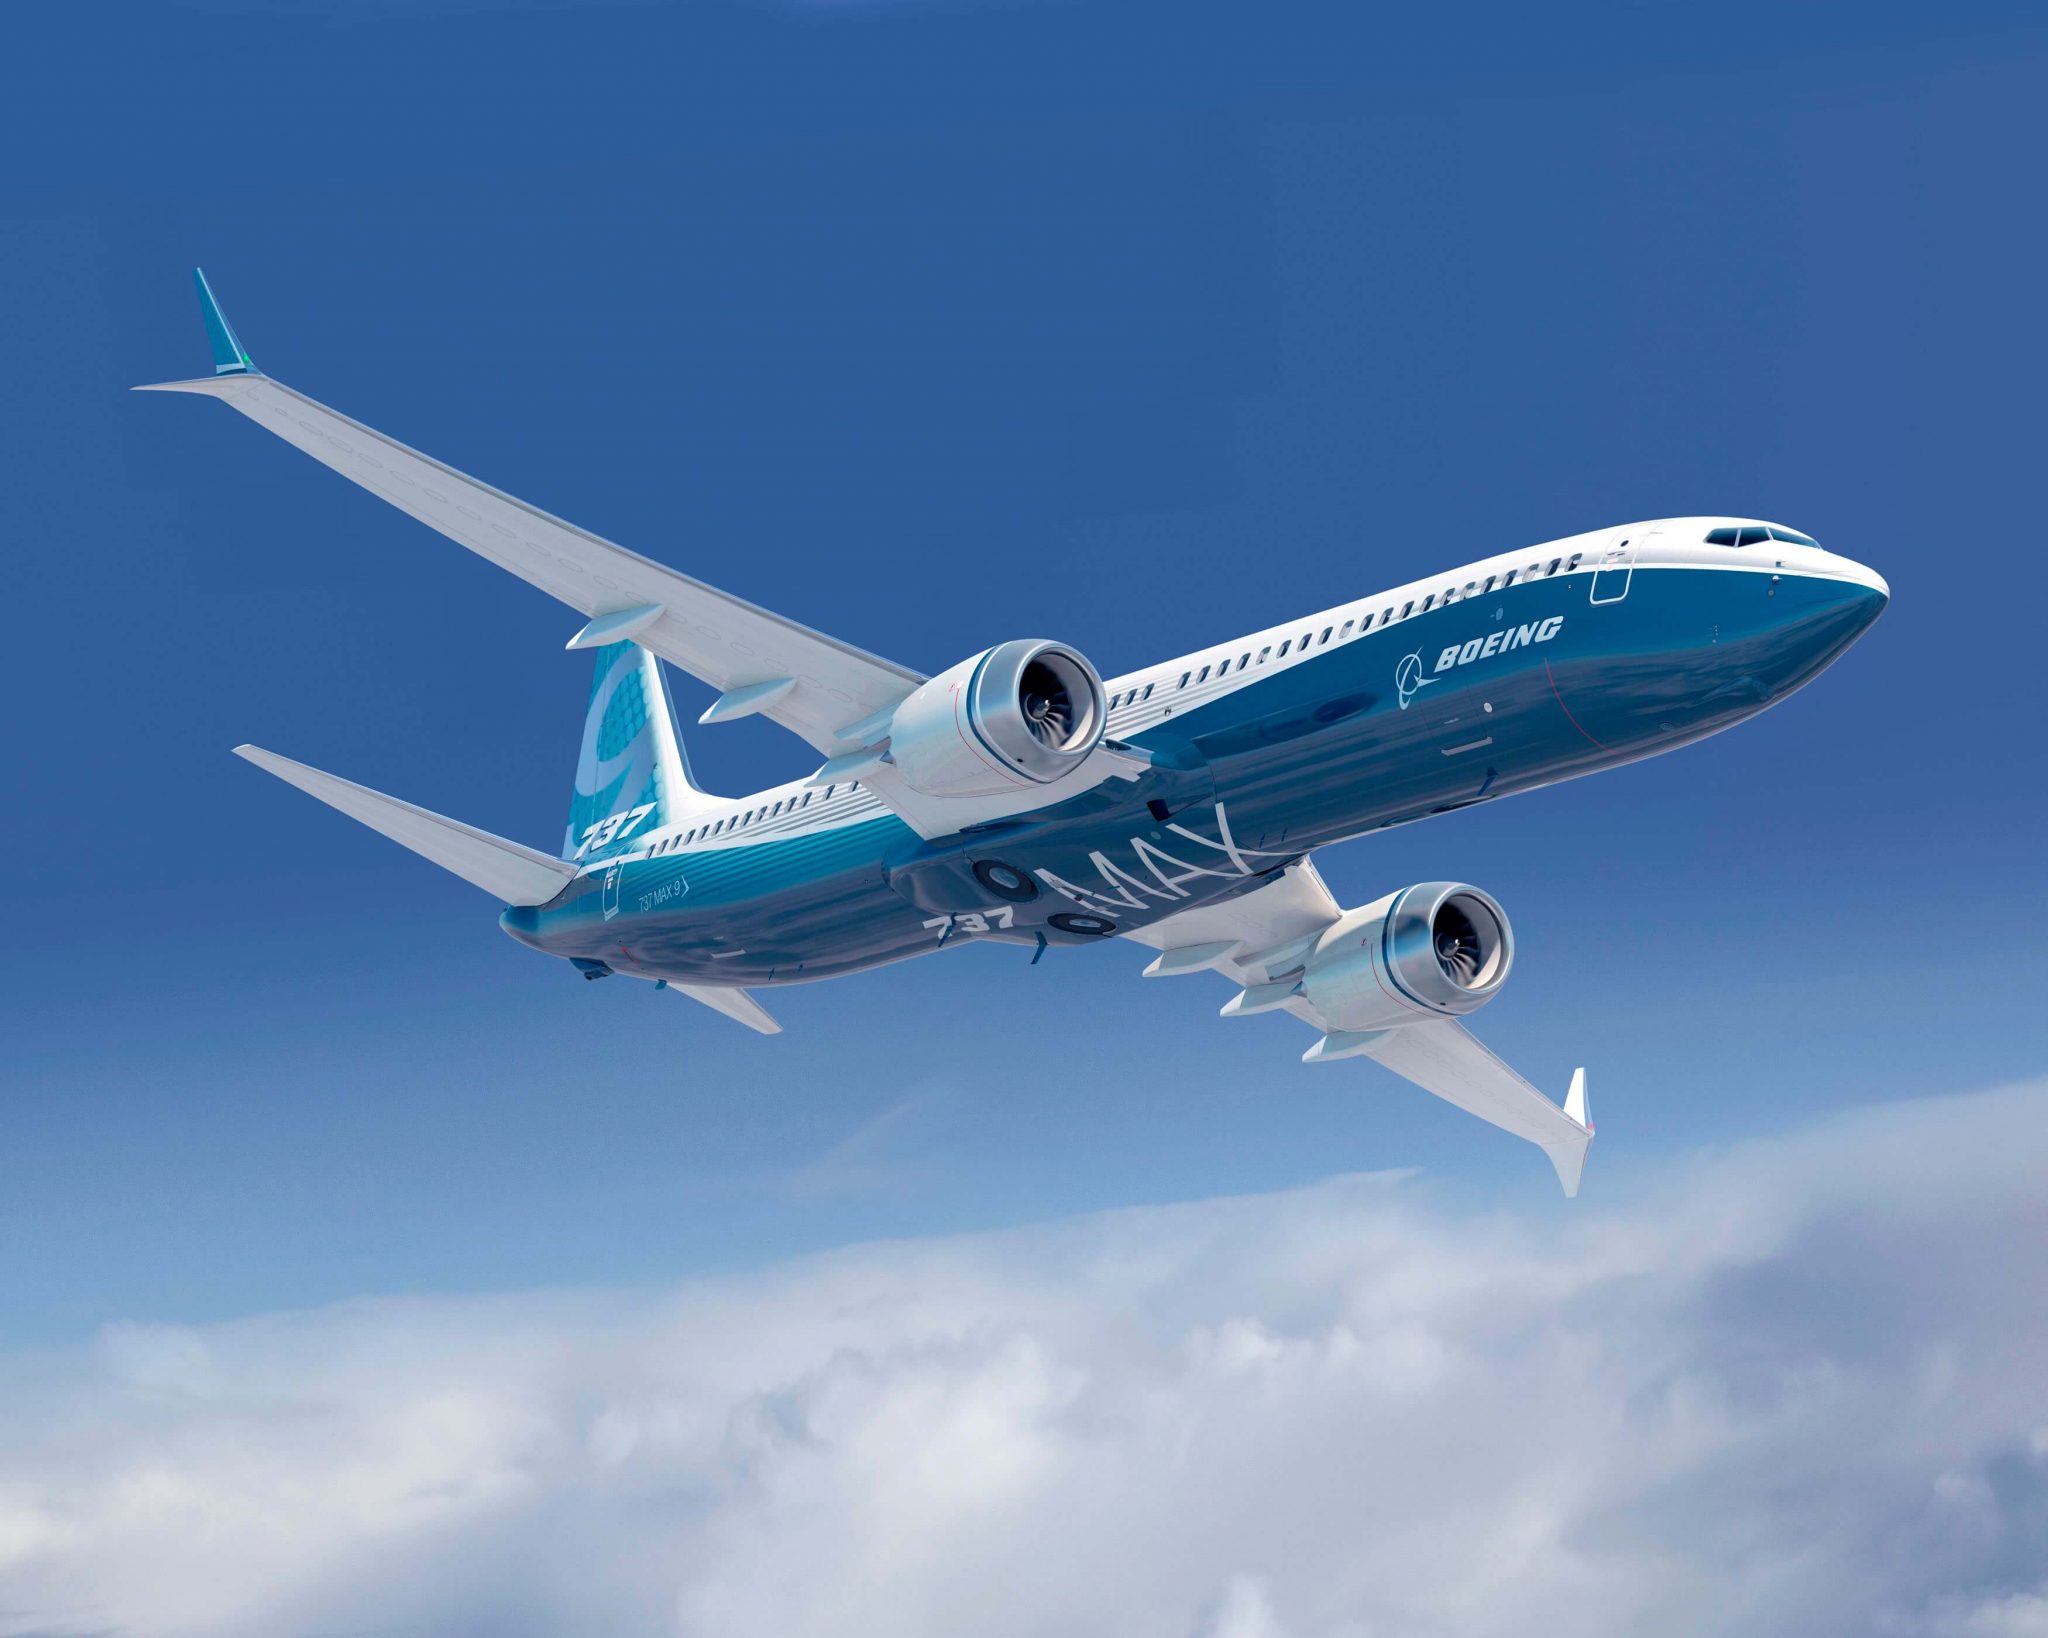 Tata Boeing Aerospace Limited ships first vertical fin structure for B737 from India